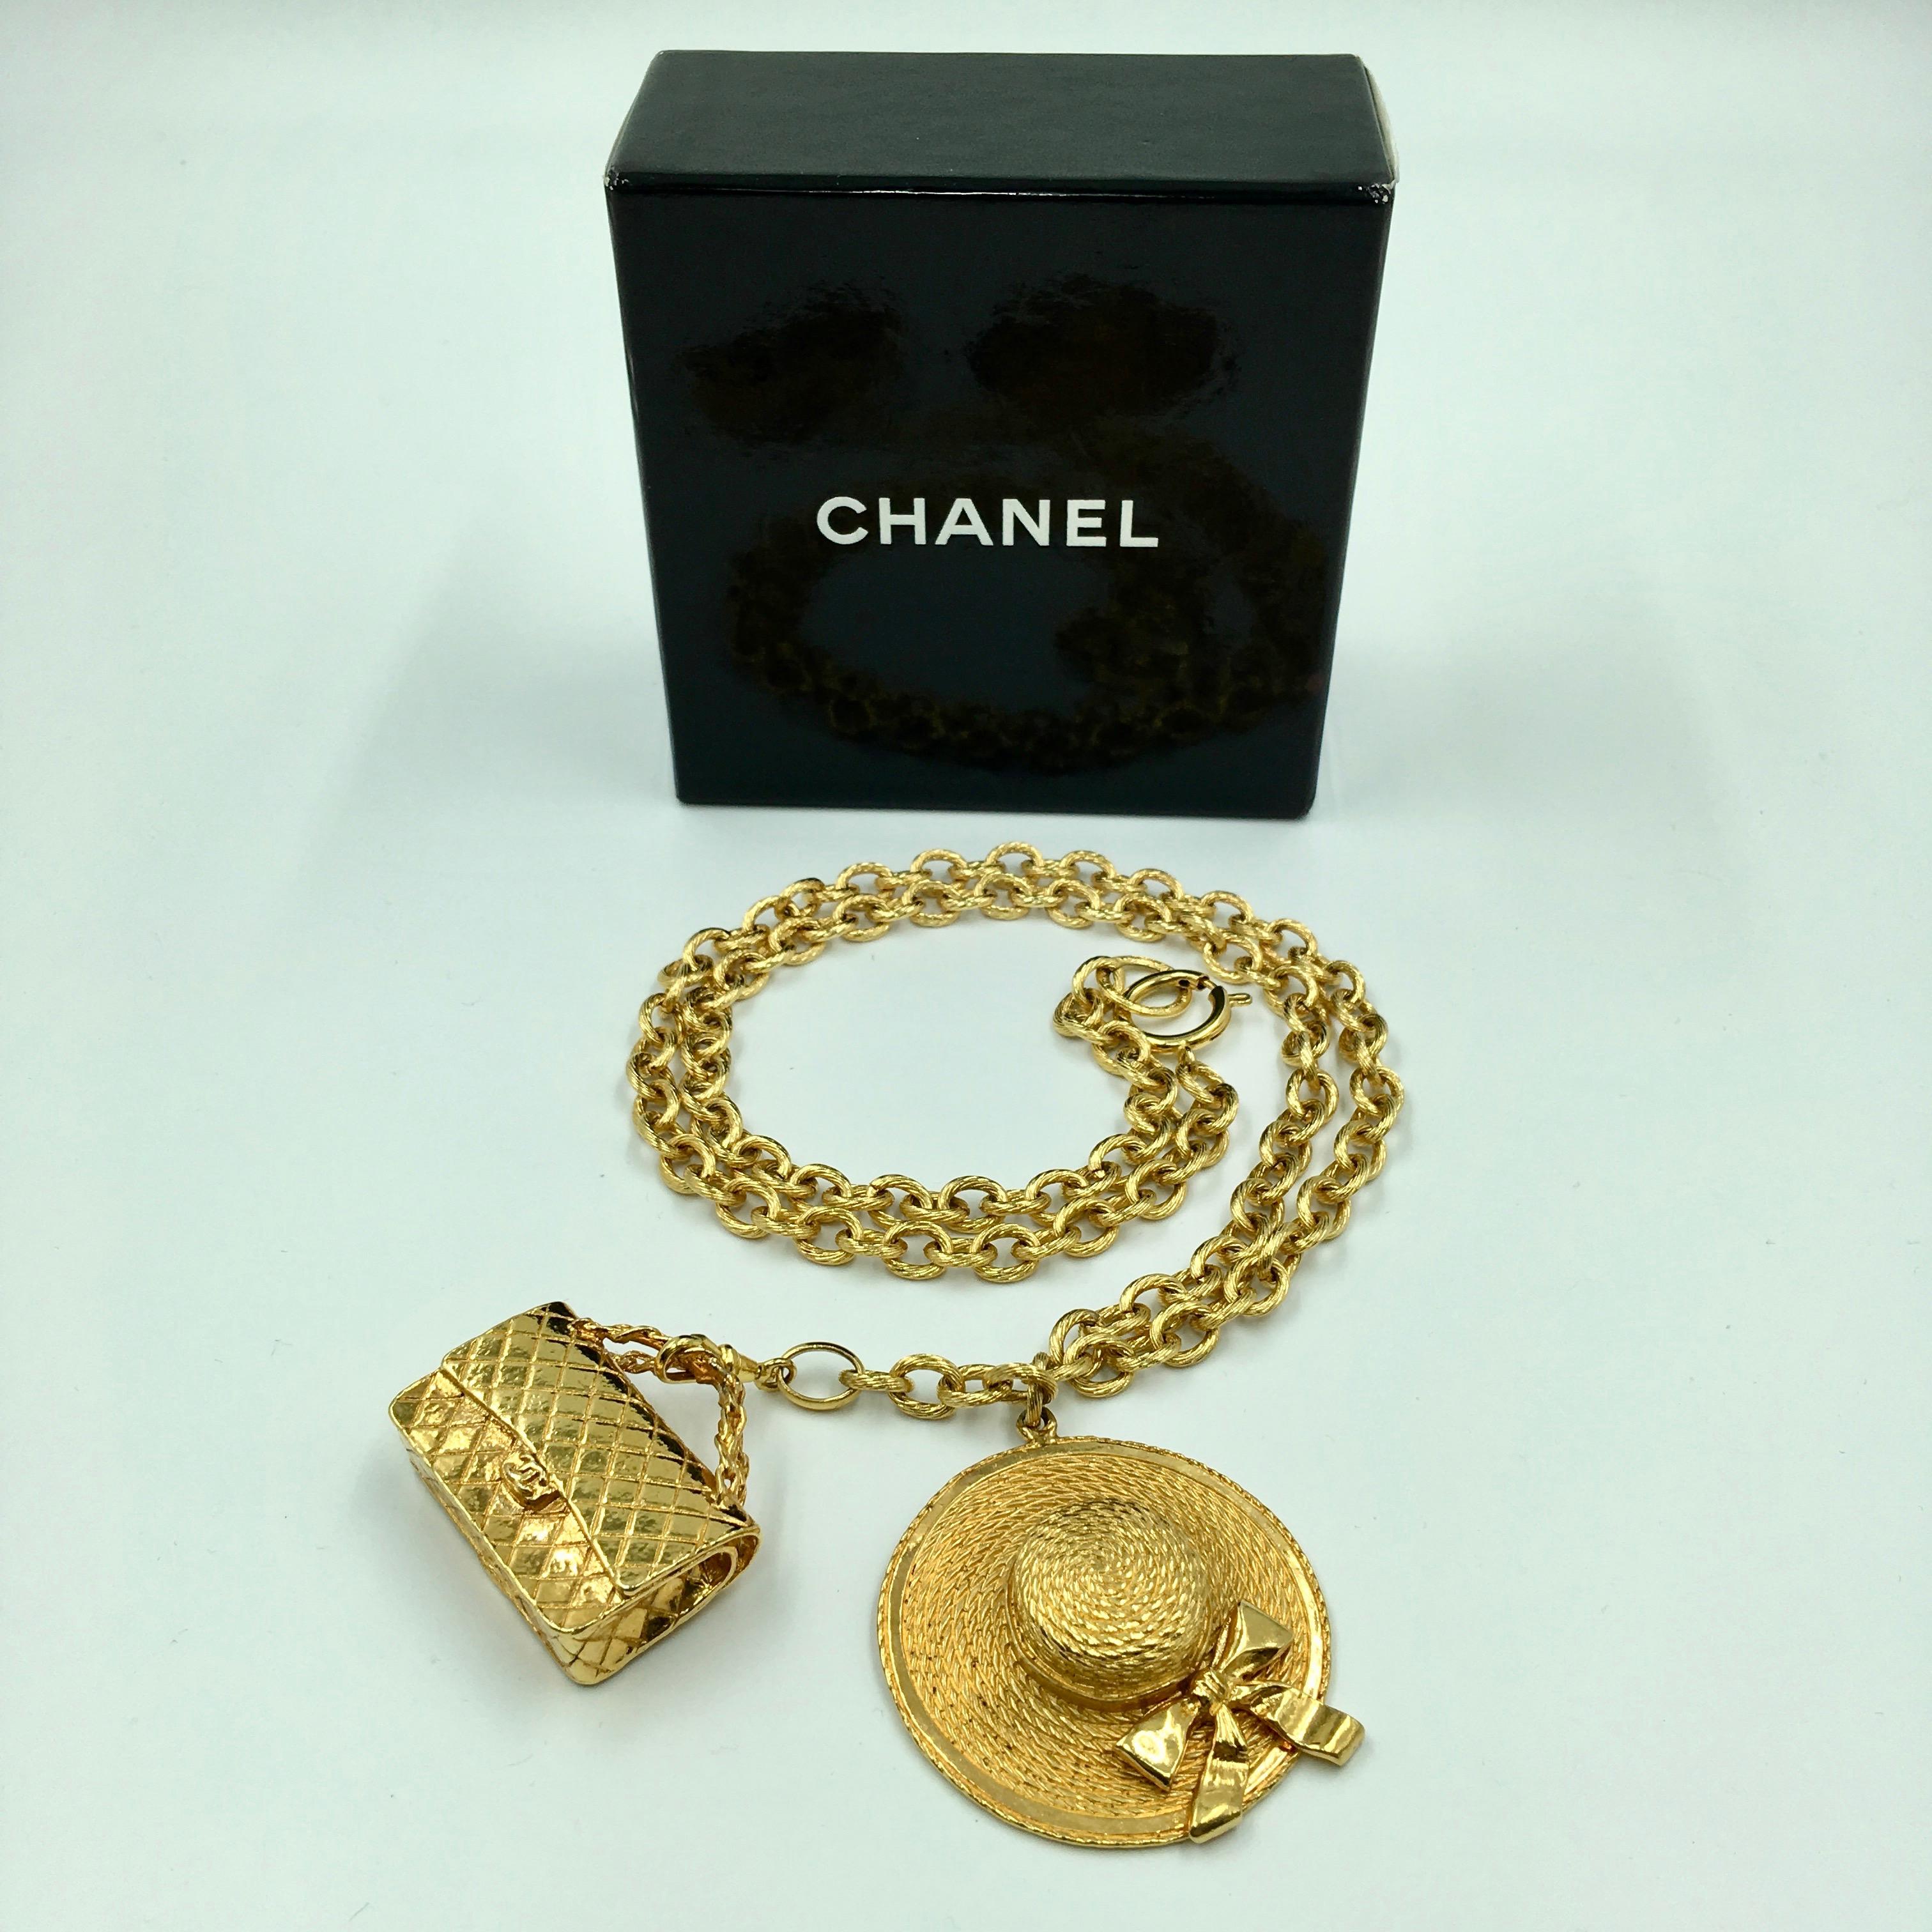 Chanel Gold Tone Classic Coco Chanel Chapeau and Quilted Handbag Charm Necklace. Stamped Chanel and Made In France. No scratches, nicks, discoloring.
Very good vintage condition. 

Measurements are as follows:

Necklace chain, from back neck drop -